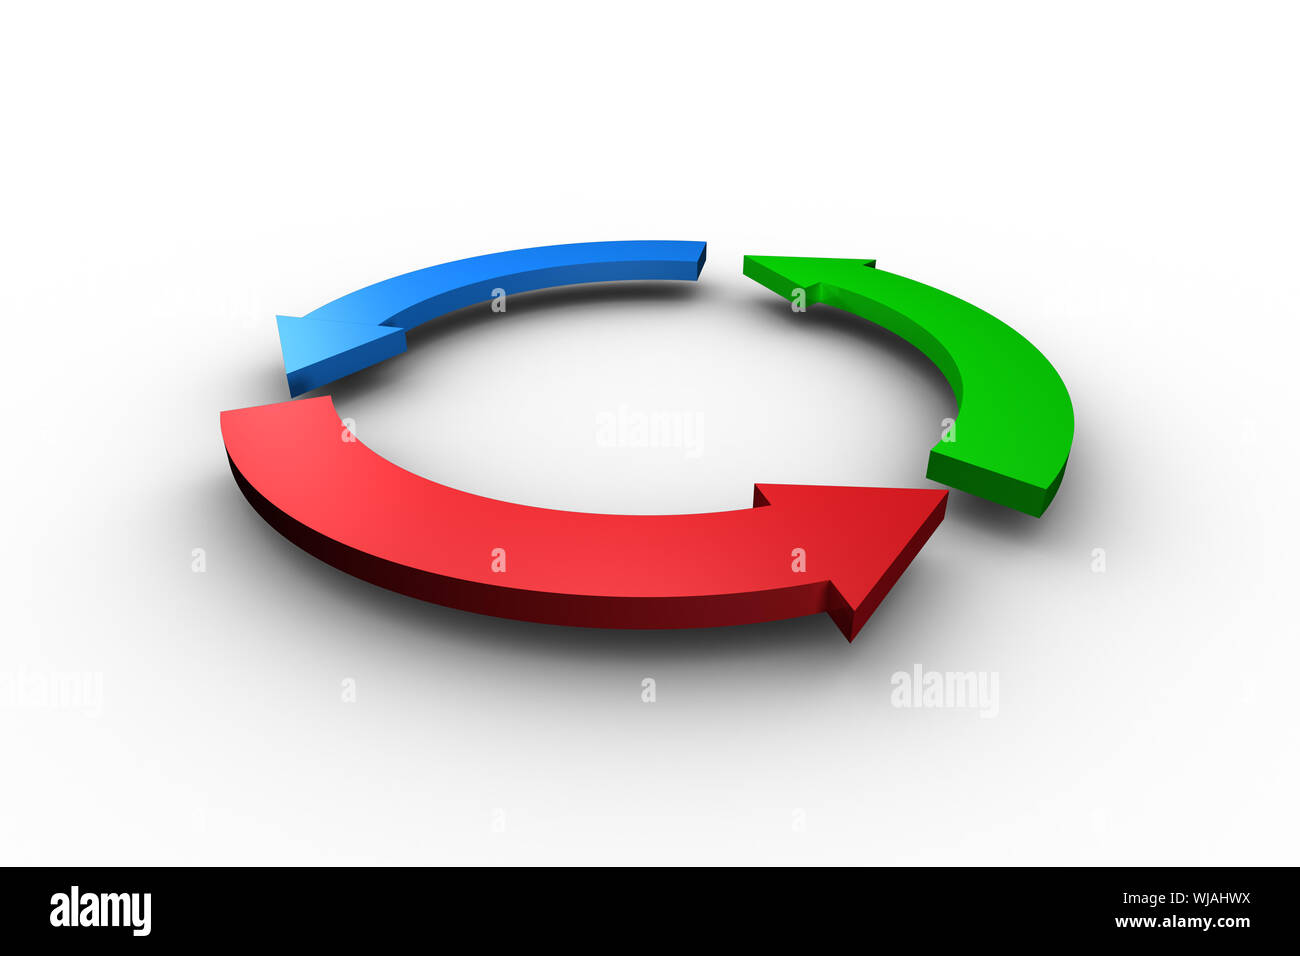 Blue red and green arrow circle Stock Photo